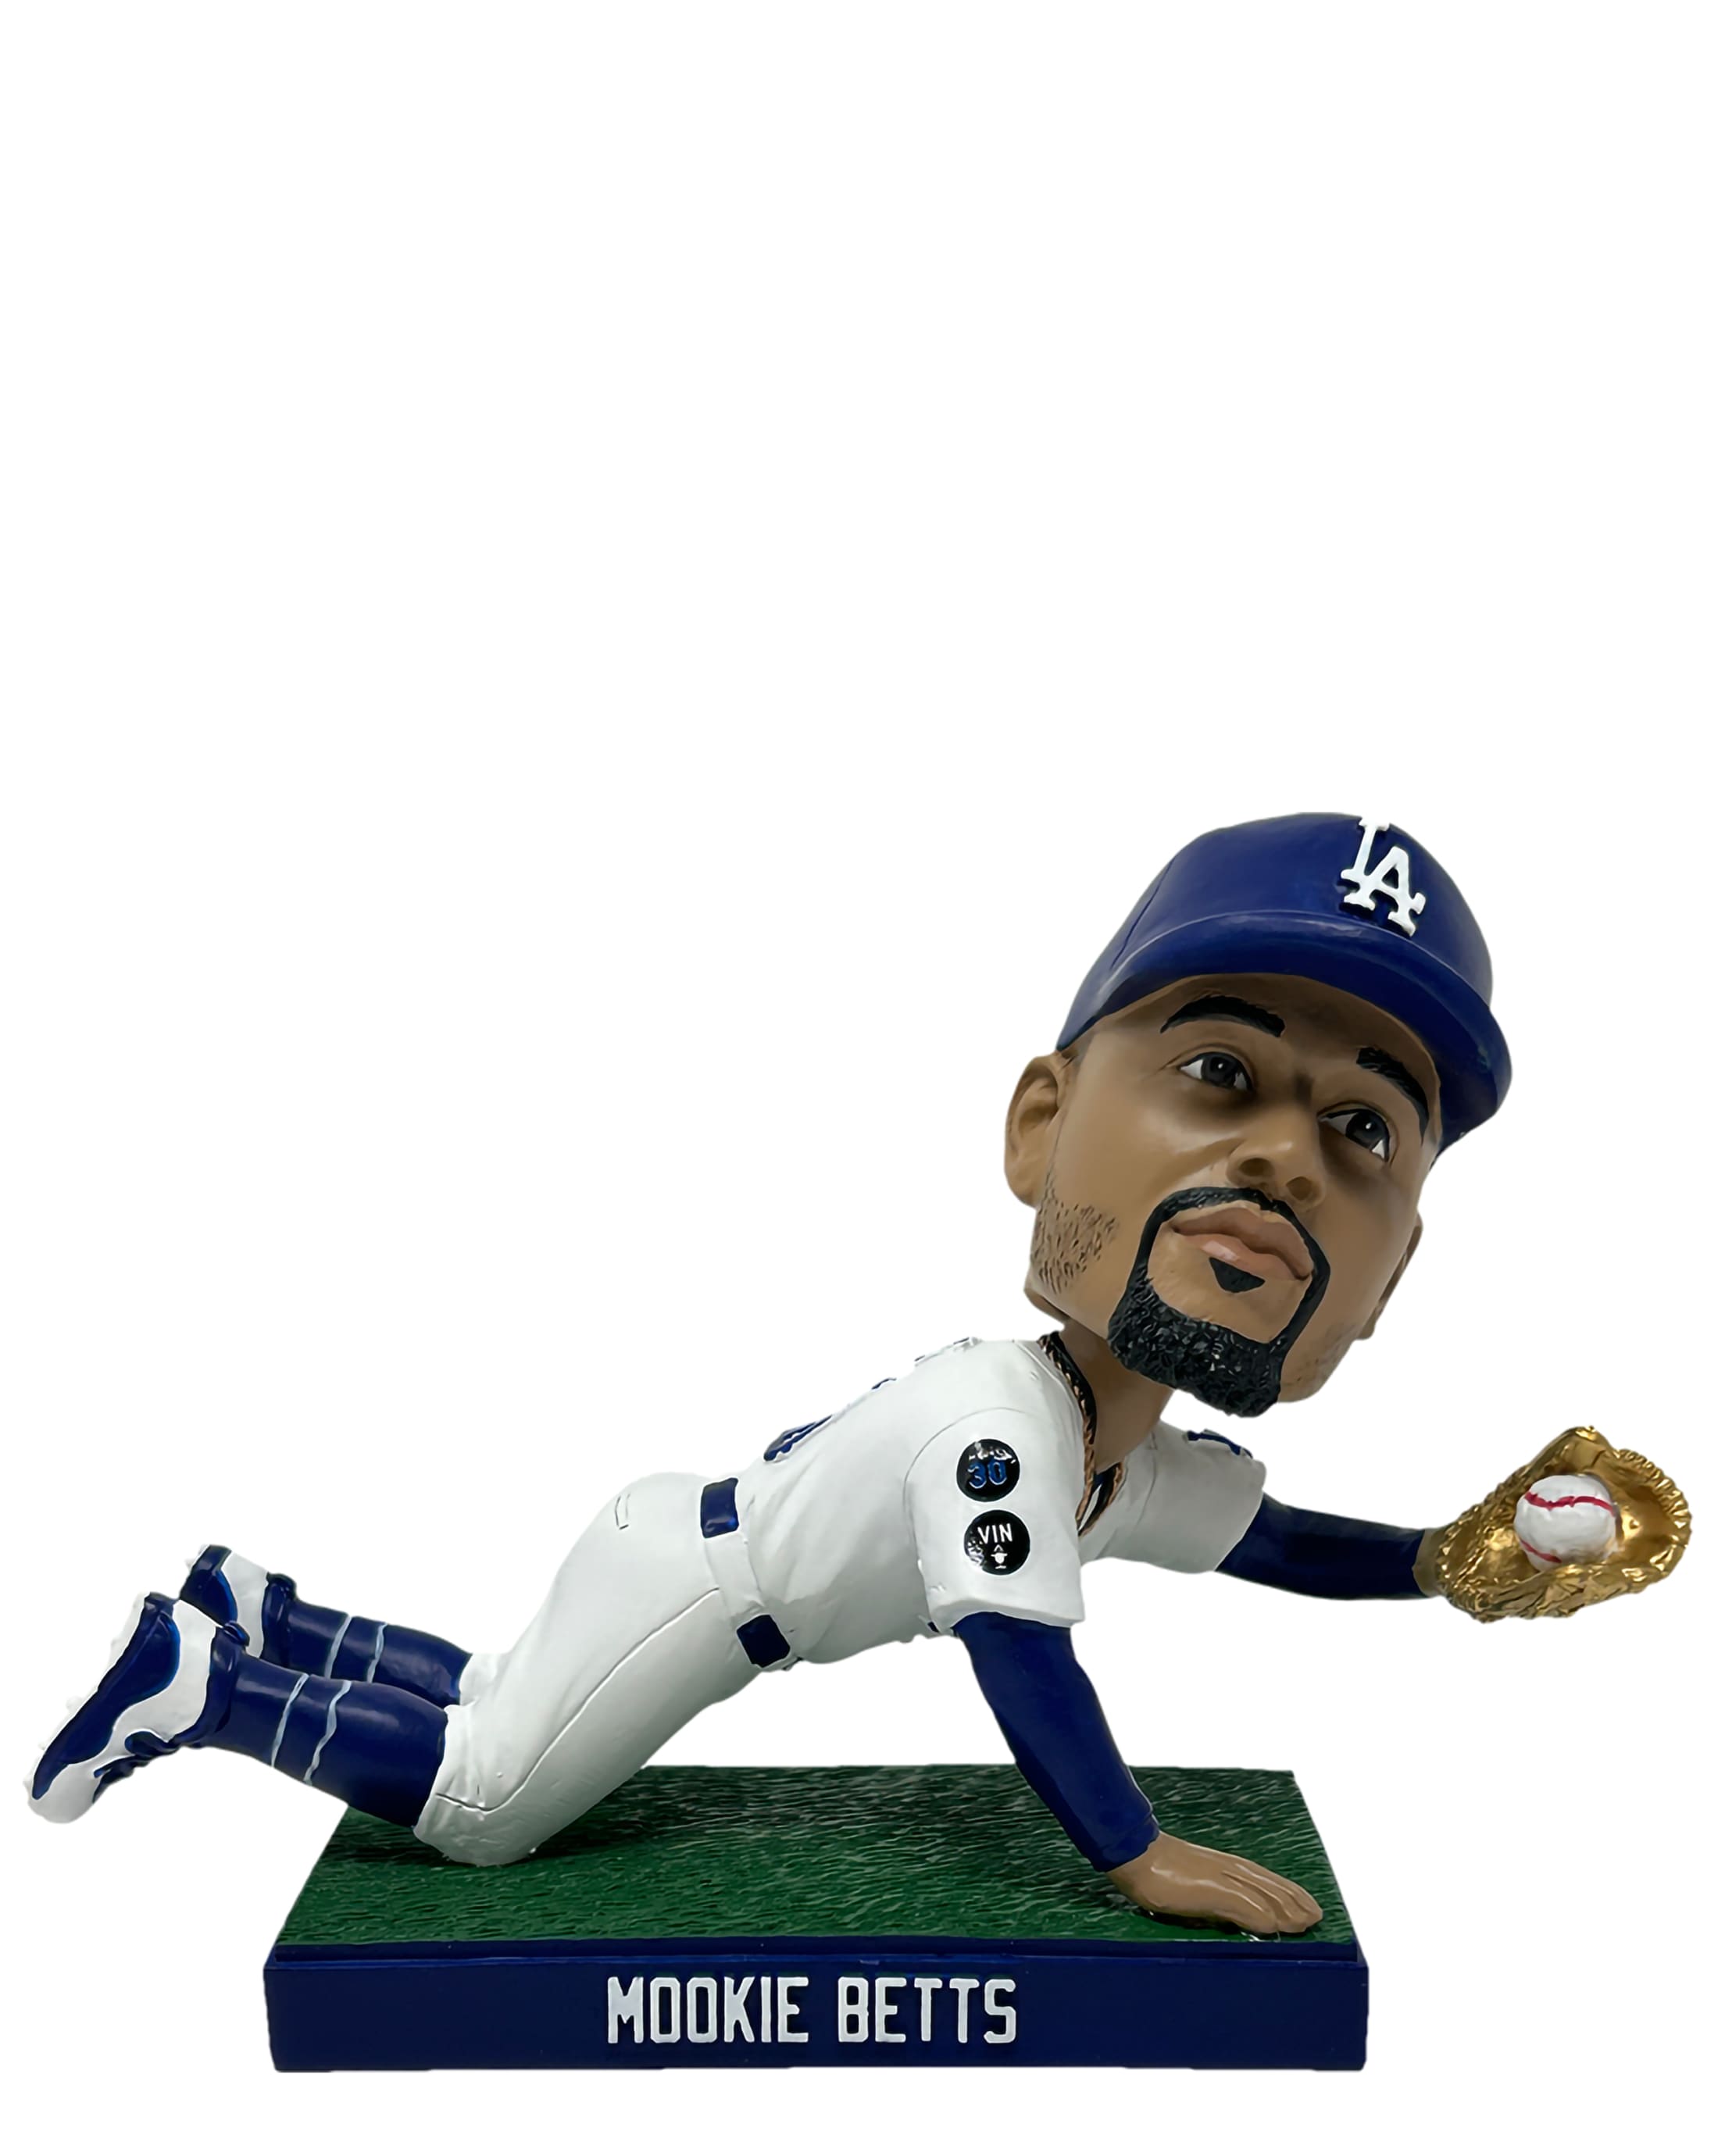 JD Martinez Los Angeles Dodgers 300 Home Run Bobblehead Officially Licensed by MLB